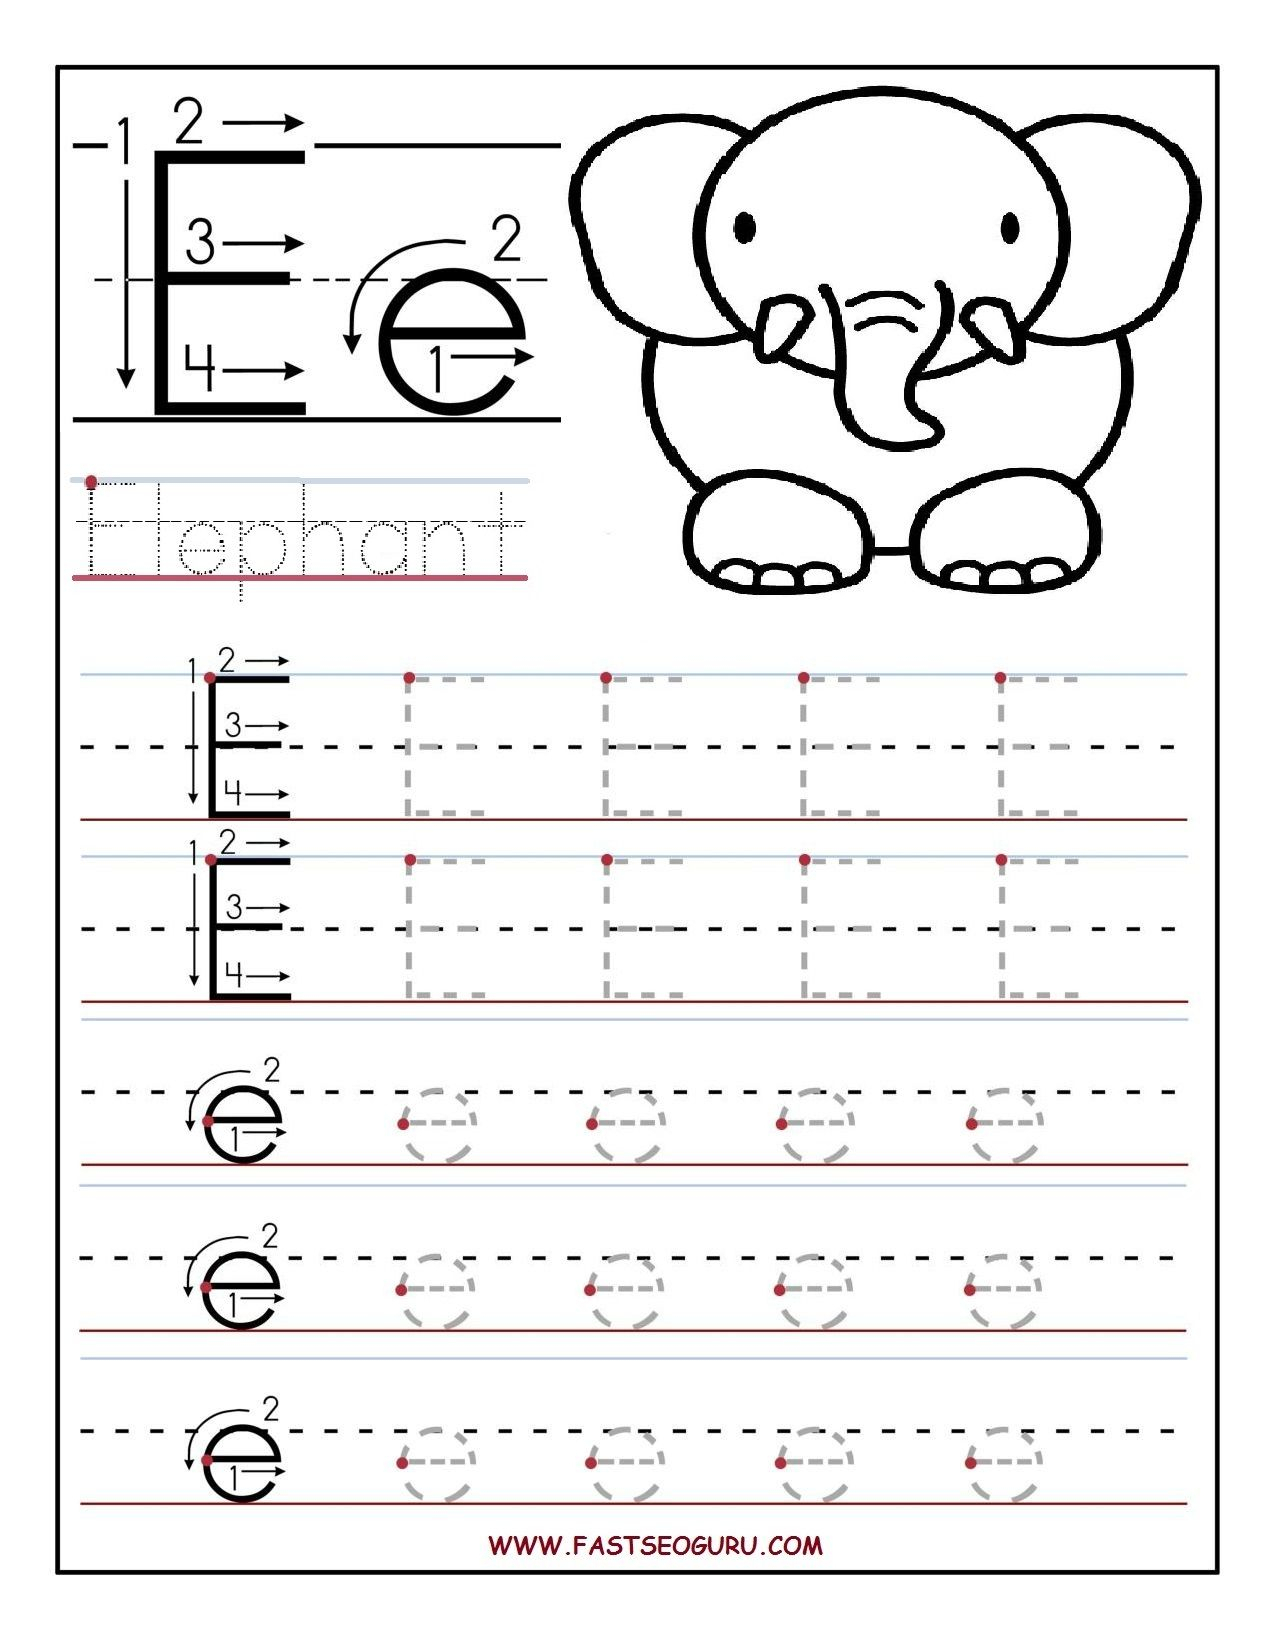 Printable Letter E Tracing Worksheets For Preschool regarding Letter E Worksheets For Pre K